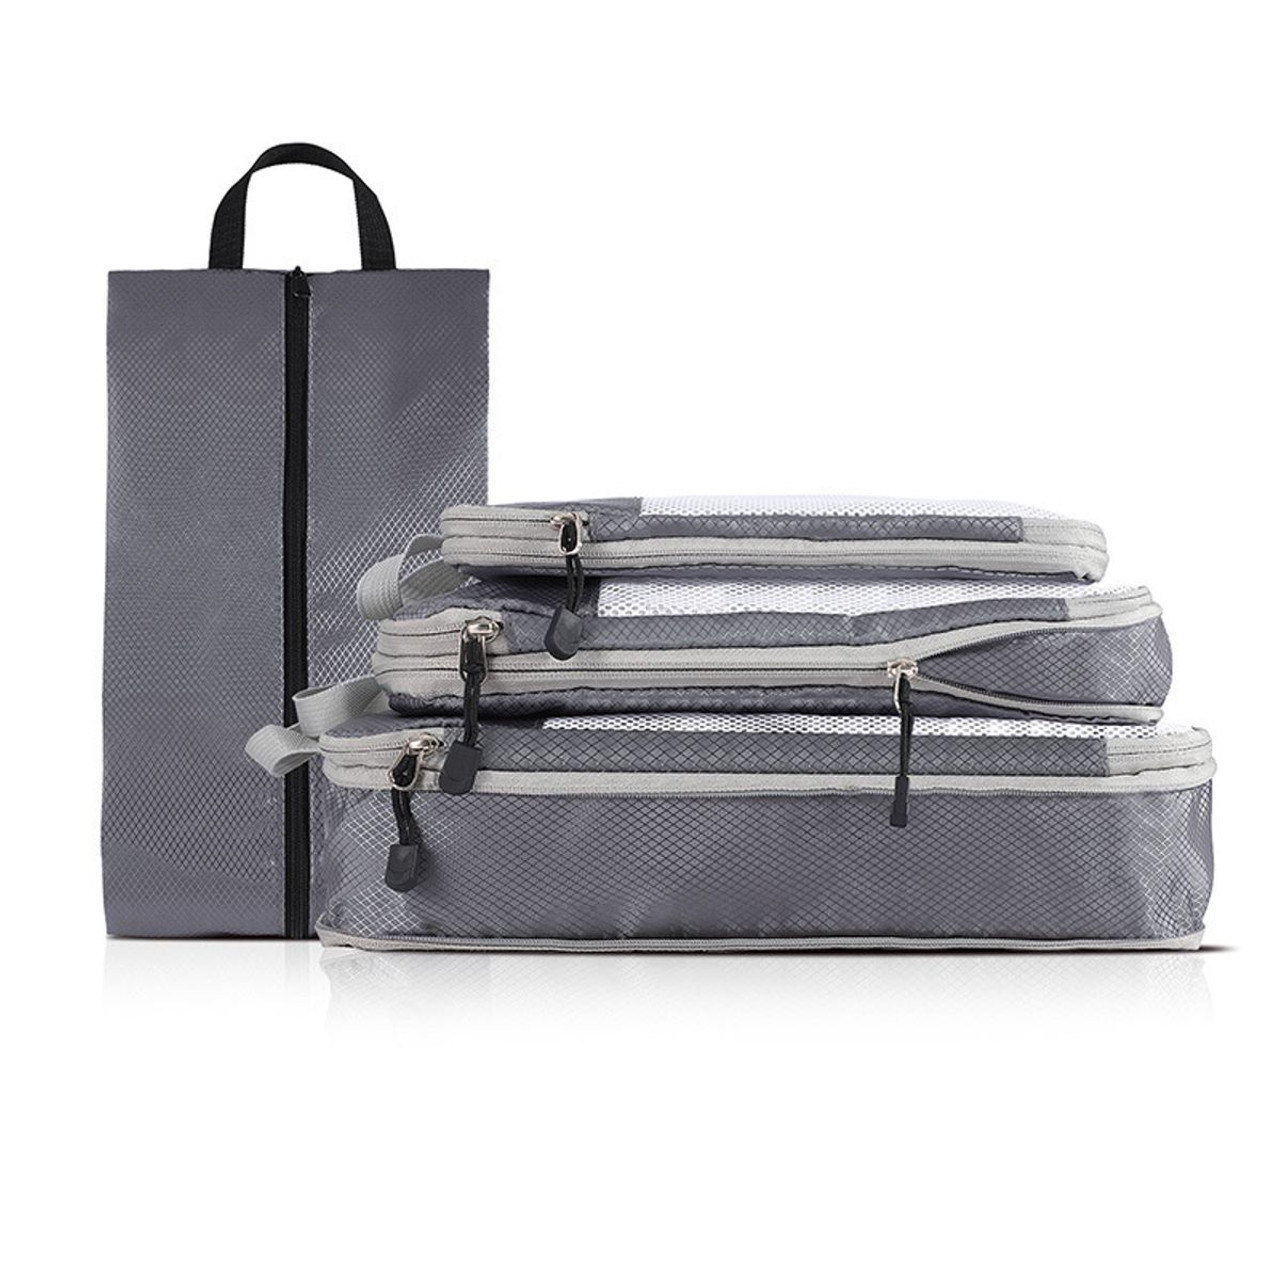 4 pcs Pack  Travel Luggage Compression Bags - Lightweight, Dustproof, and Versatile Storage Organizers Color Grey product image